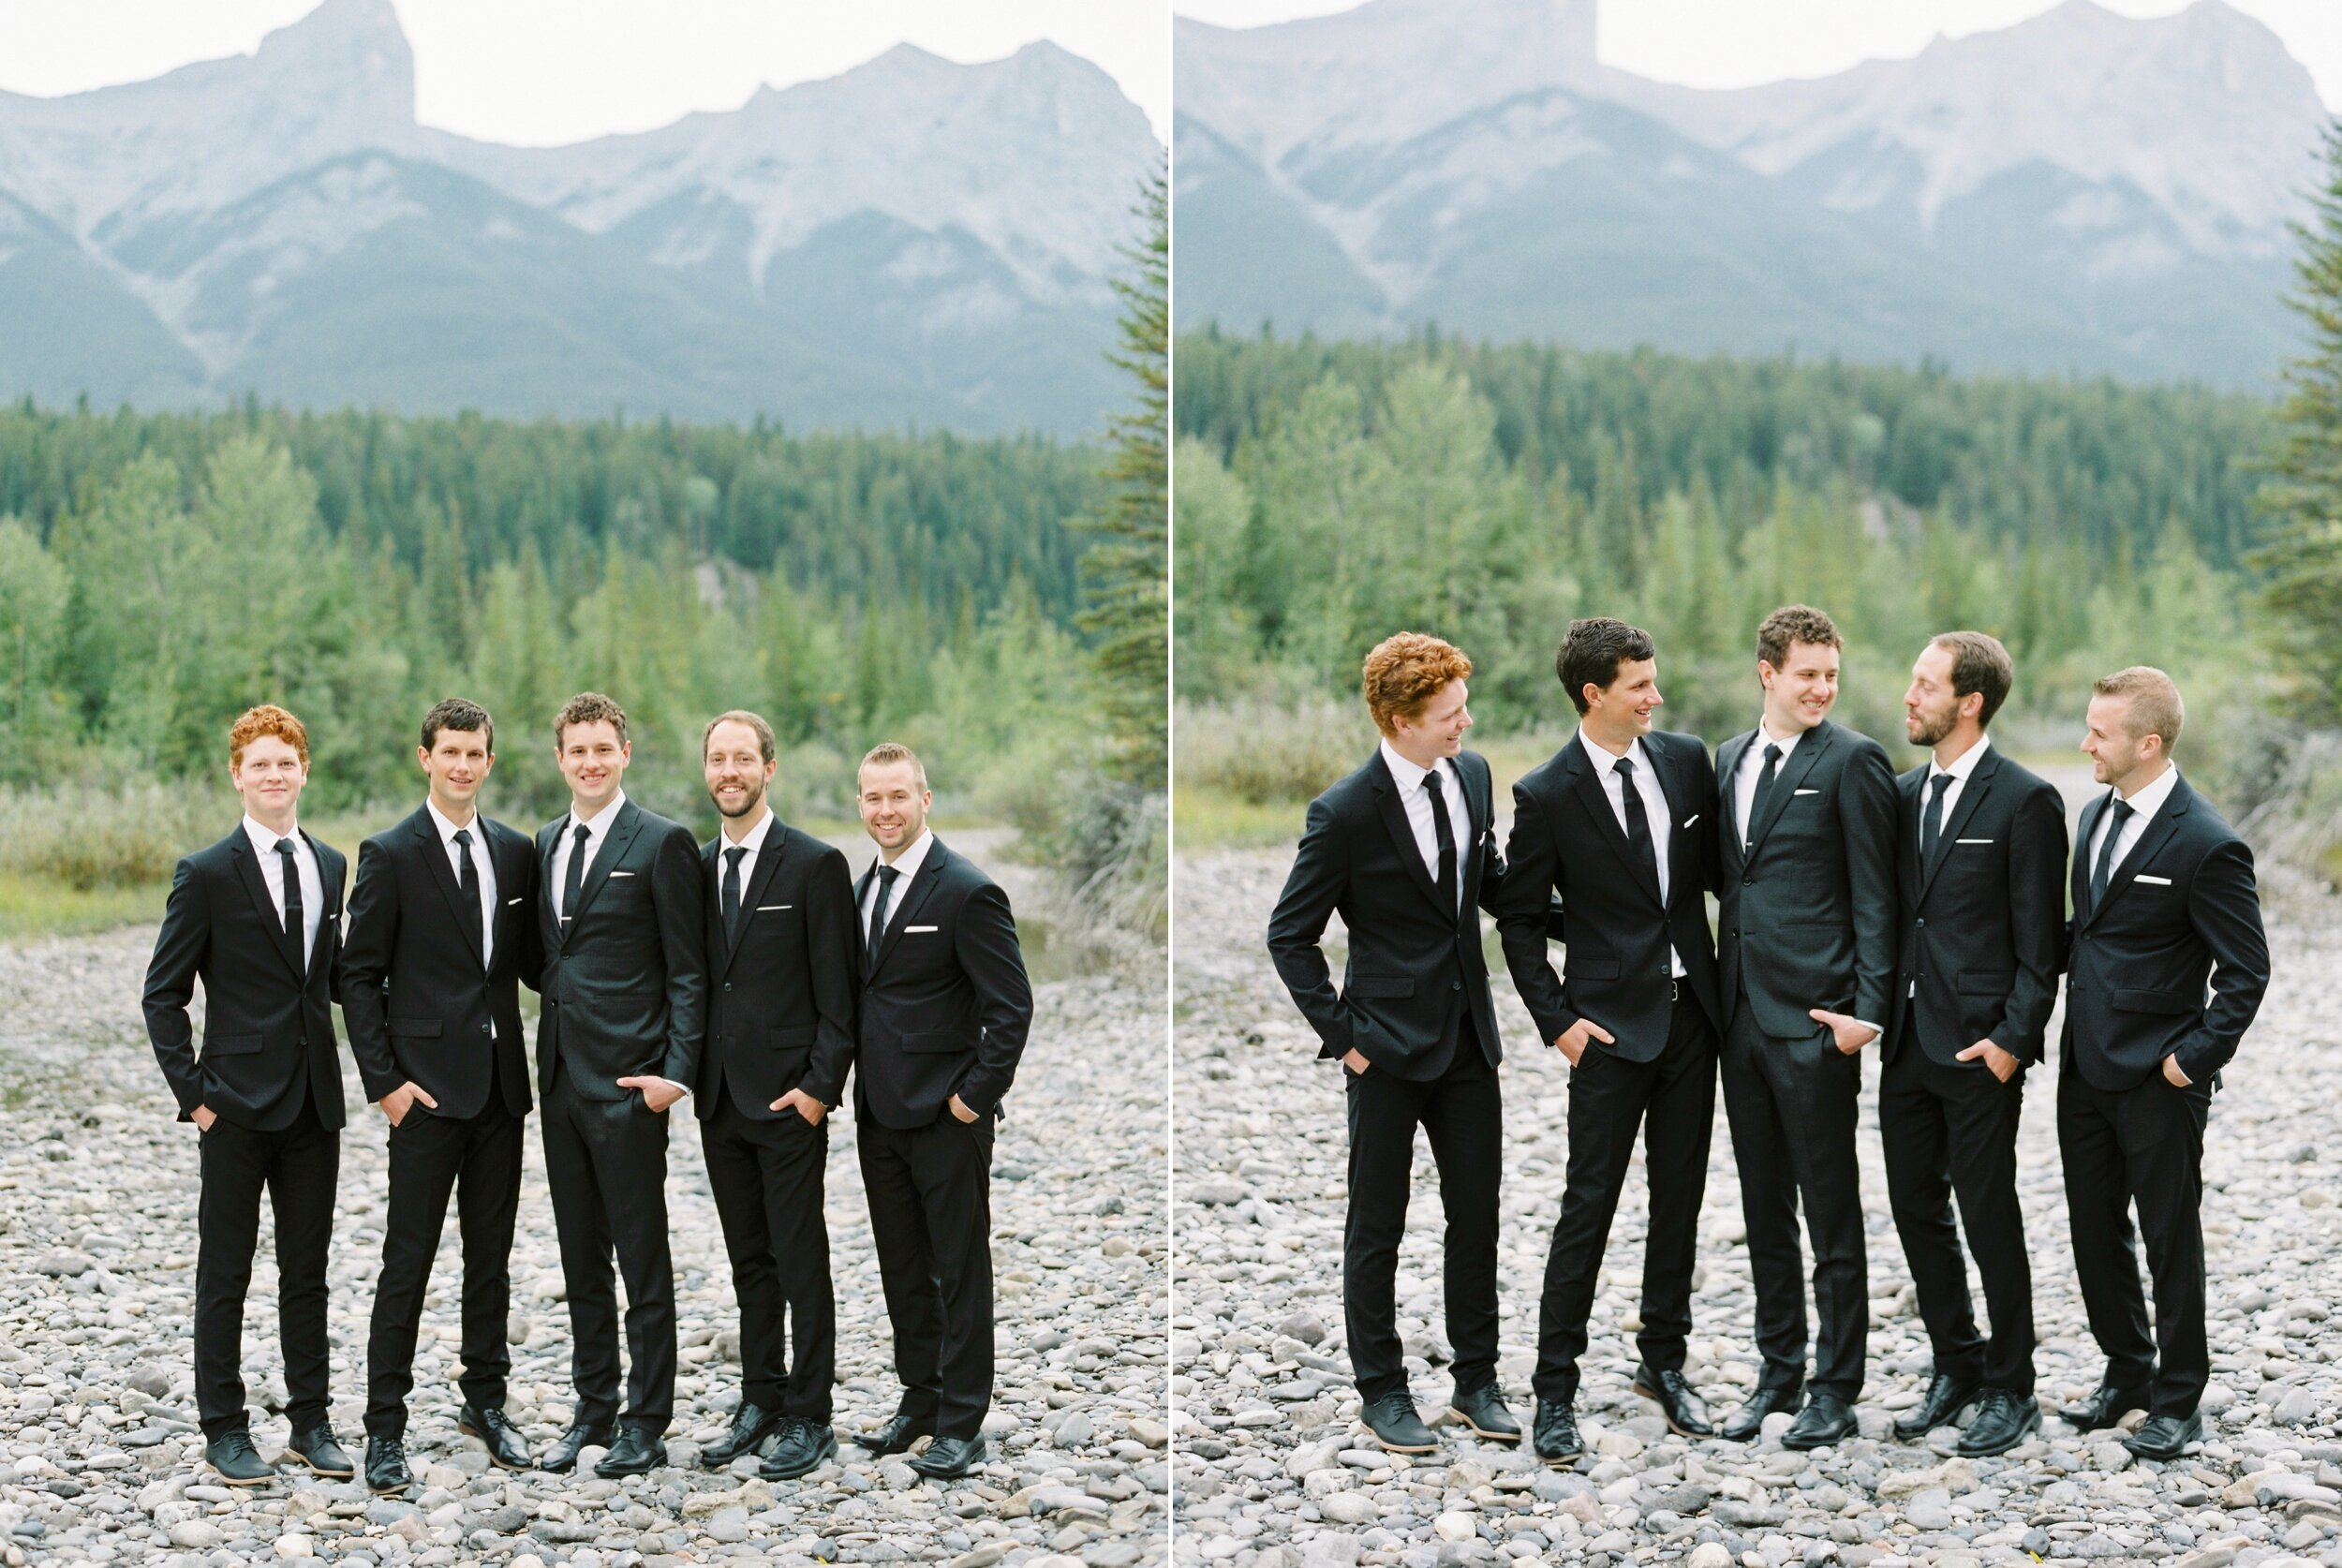  bridesmaids and groomsmen in matching black dresses and suits | all black wedding party | The Malcom Canmore Wedding Photographer | Fine Art film wedding photoraphy | portra 400 